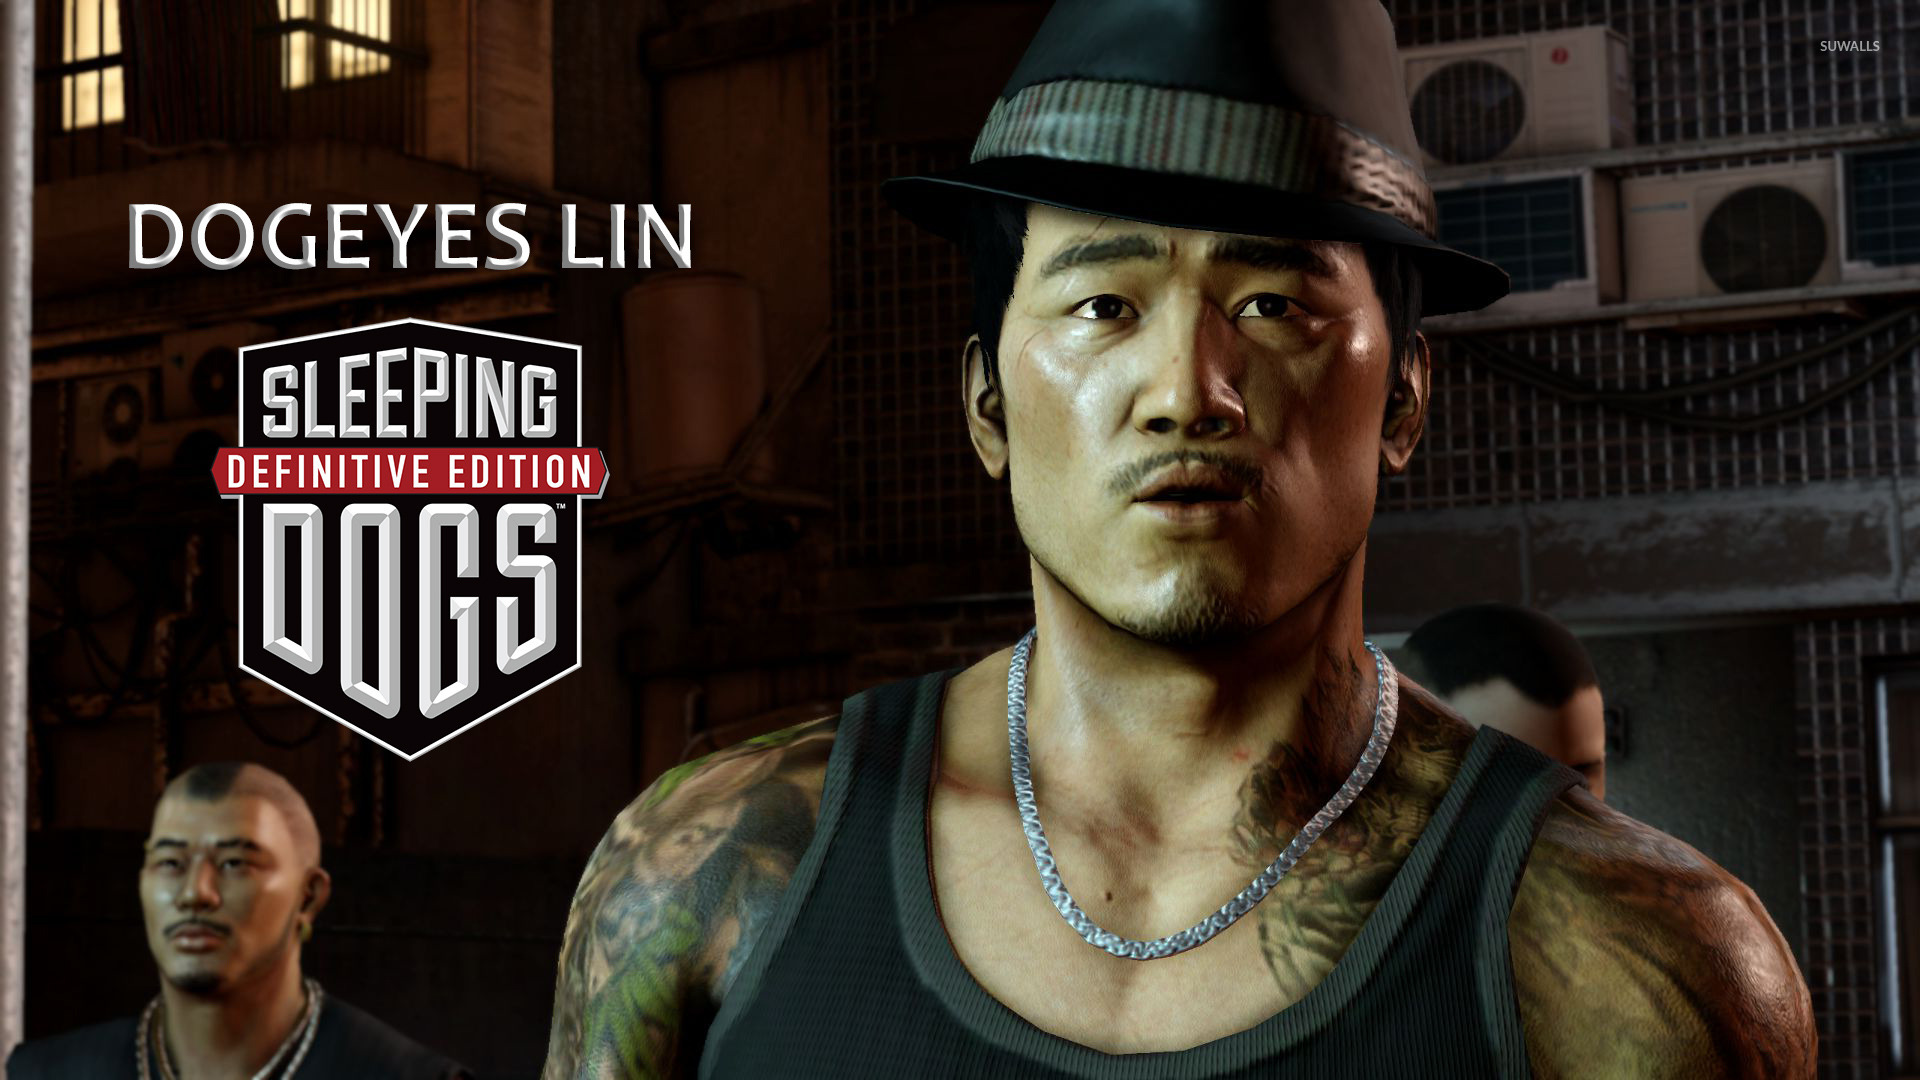 4k sleeping dogs images